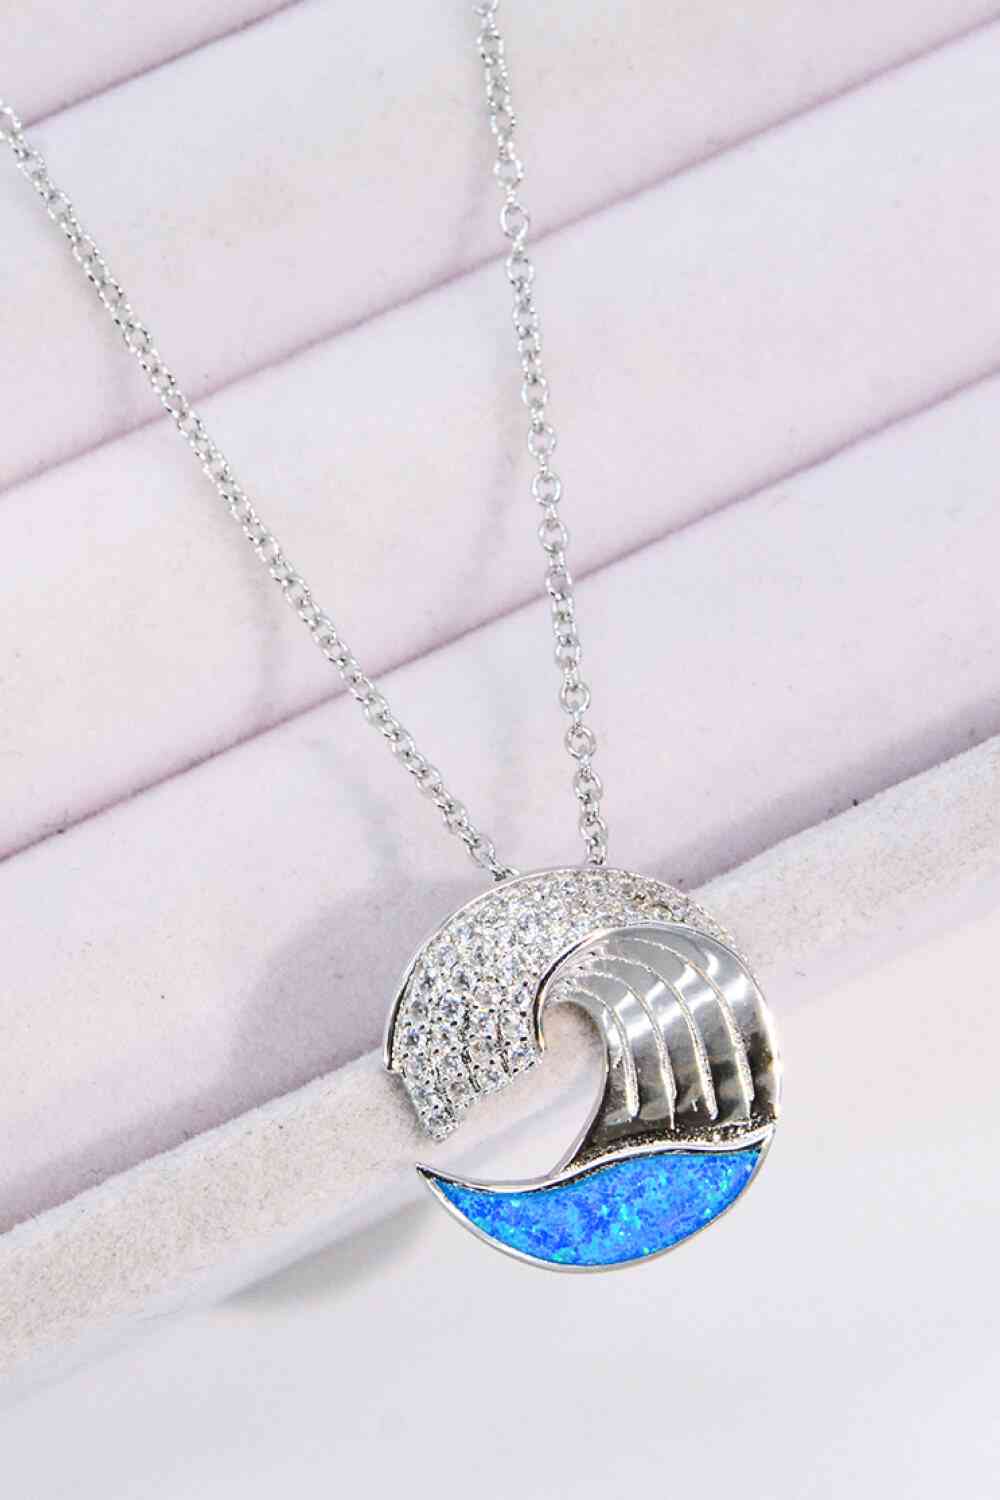 Wave Pendant Necklace-Blue Opal/Circon/925 Sterling Silver